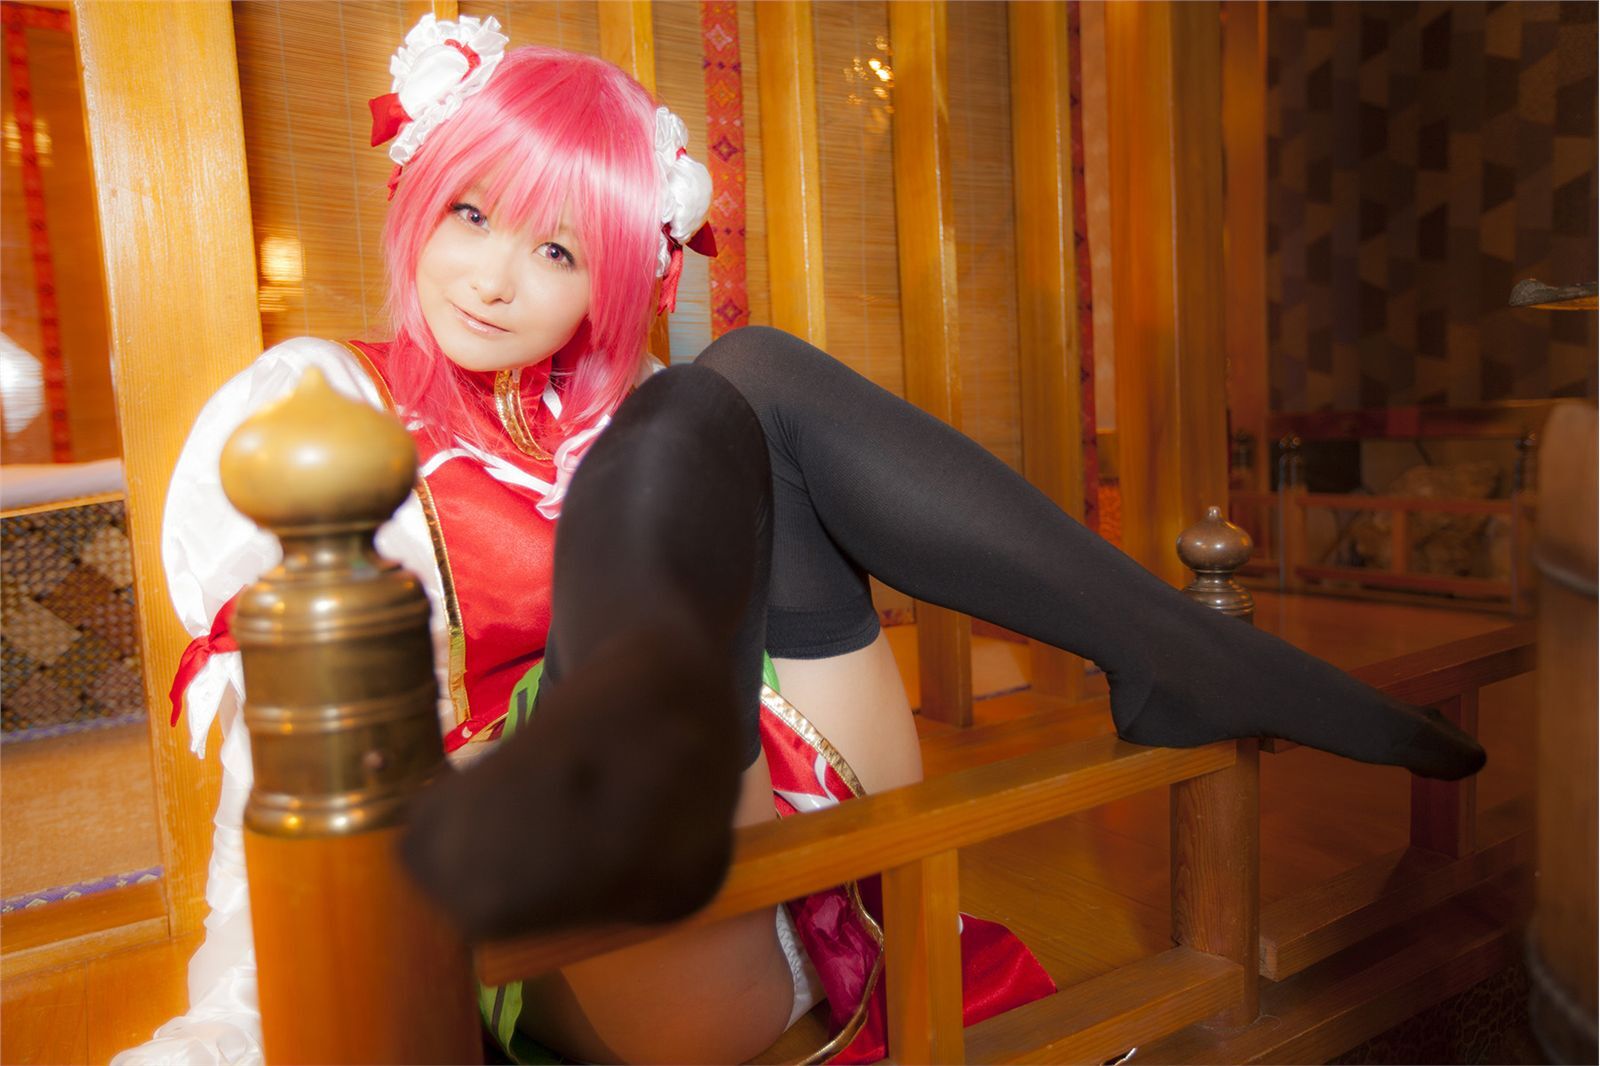 [Cosplay] 2013.12.13 New Touhou Project Cosplay set - Awesome Kasen Ibara